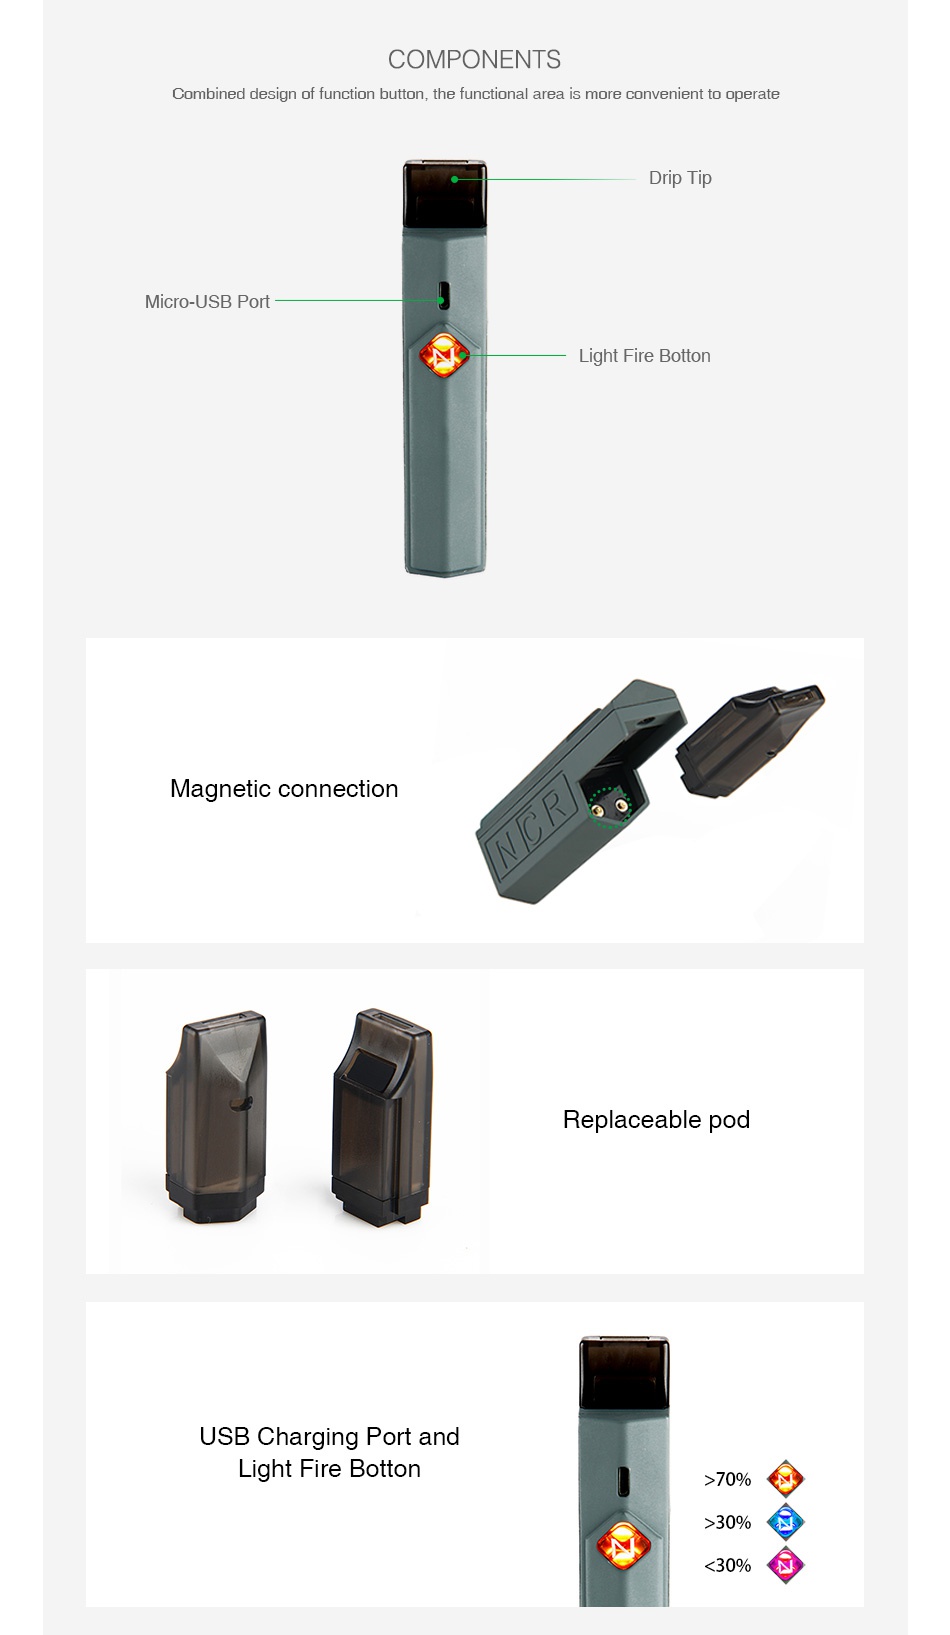 NCR TOGO POD Kit 1500mAh COMPONENTS Combined design of function button  the functional area is more convenient to operate Drip Ti Micro USB Port Light fire botton Magnetic connection Replaceable pod USB Charging Port and Light fire botton  70  30